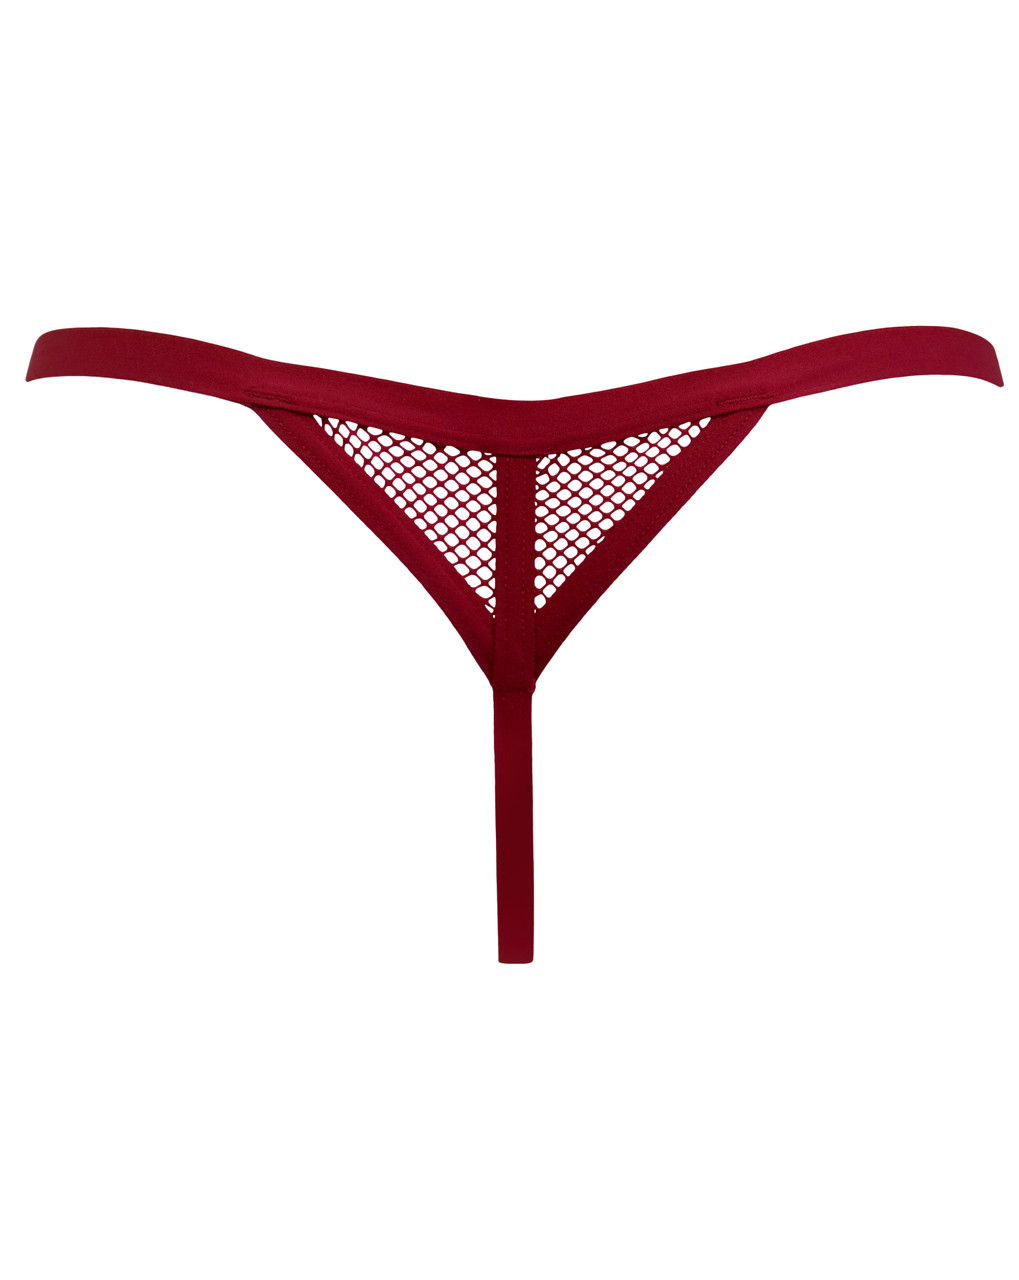 Pour Moi Dark Romance Thong in Red/Black FINAL SALE NORMALLY $26